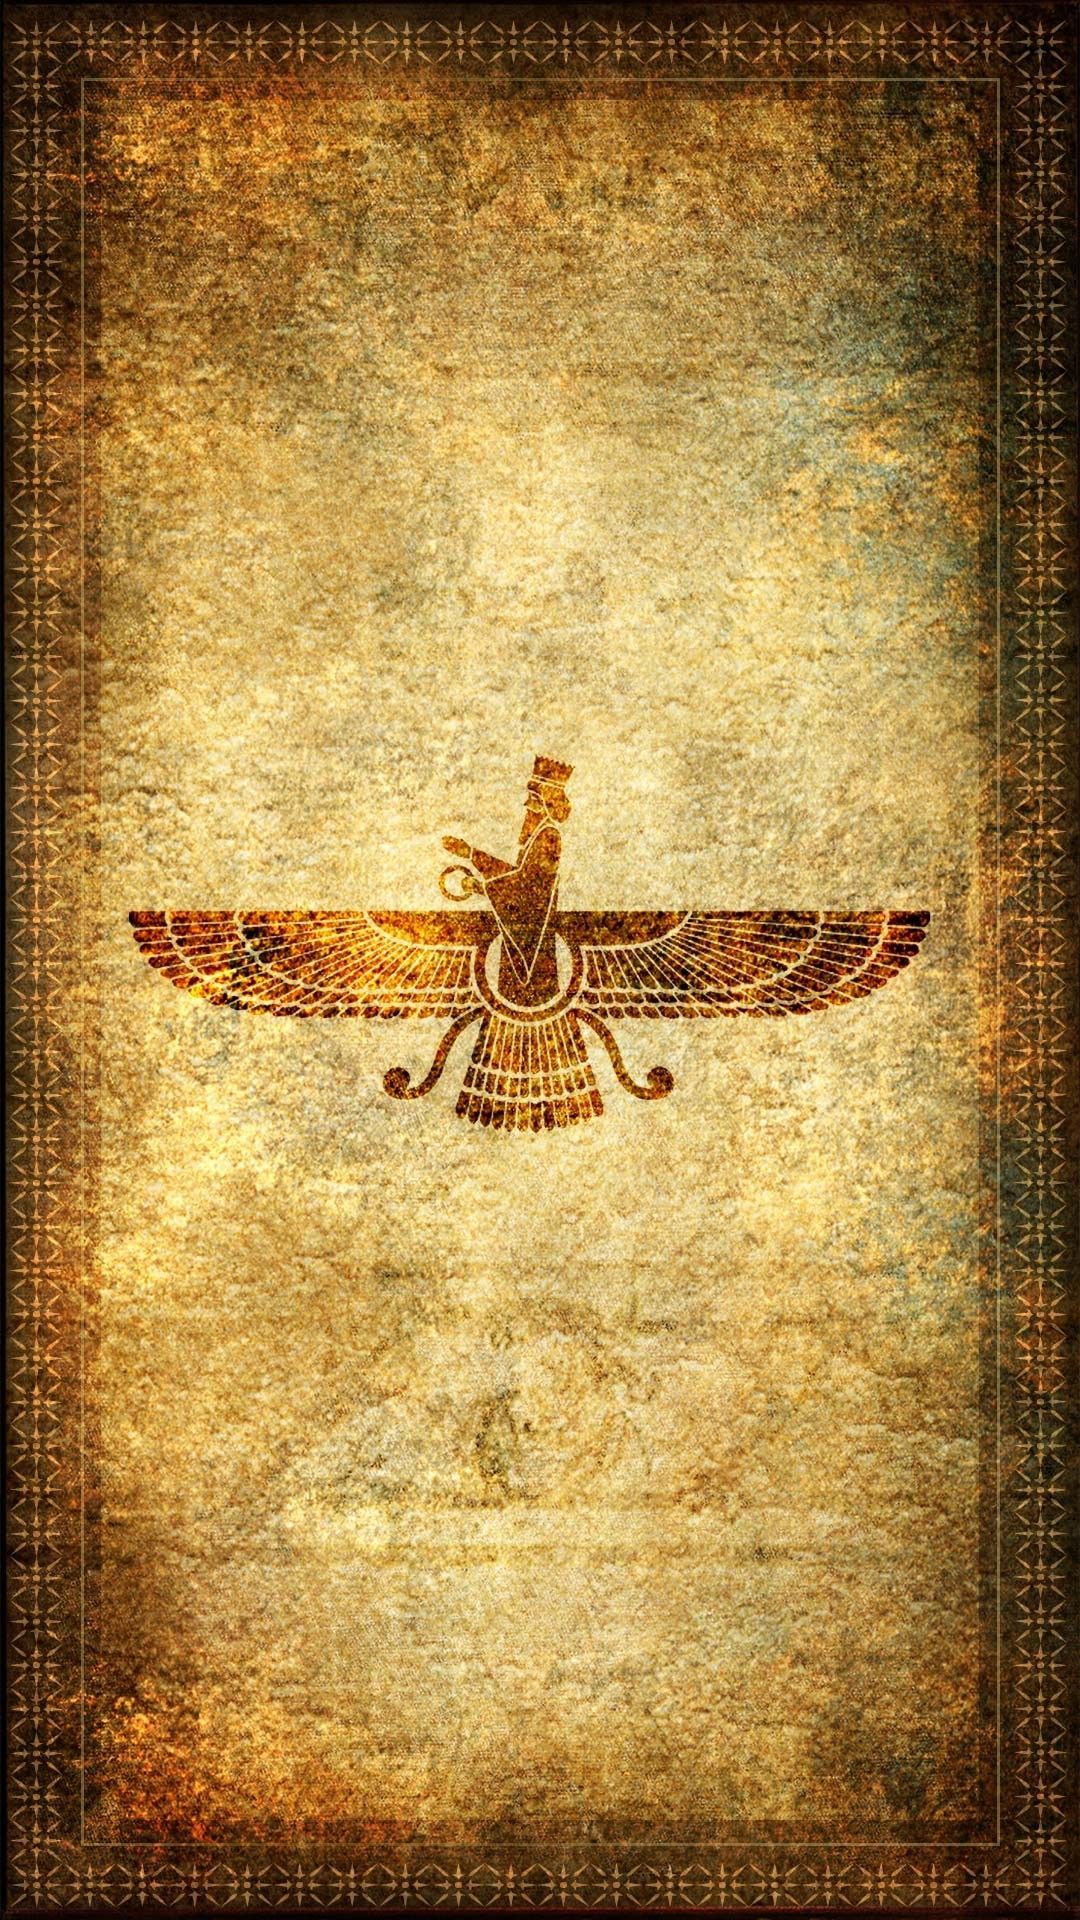 Ancient Iran Wallpapers - Top Free Ancient Iran Backgrounds ...